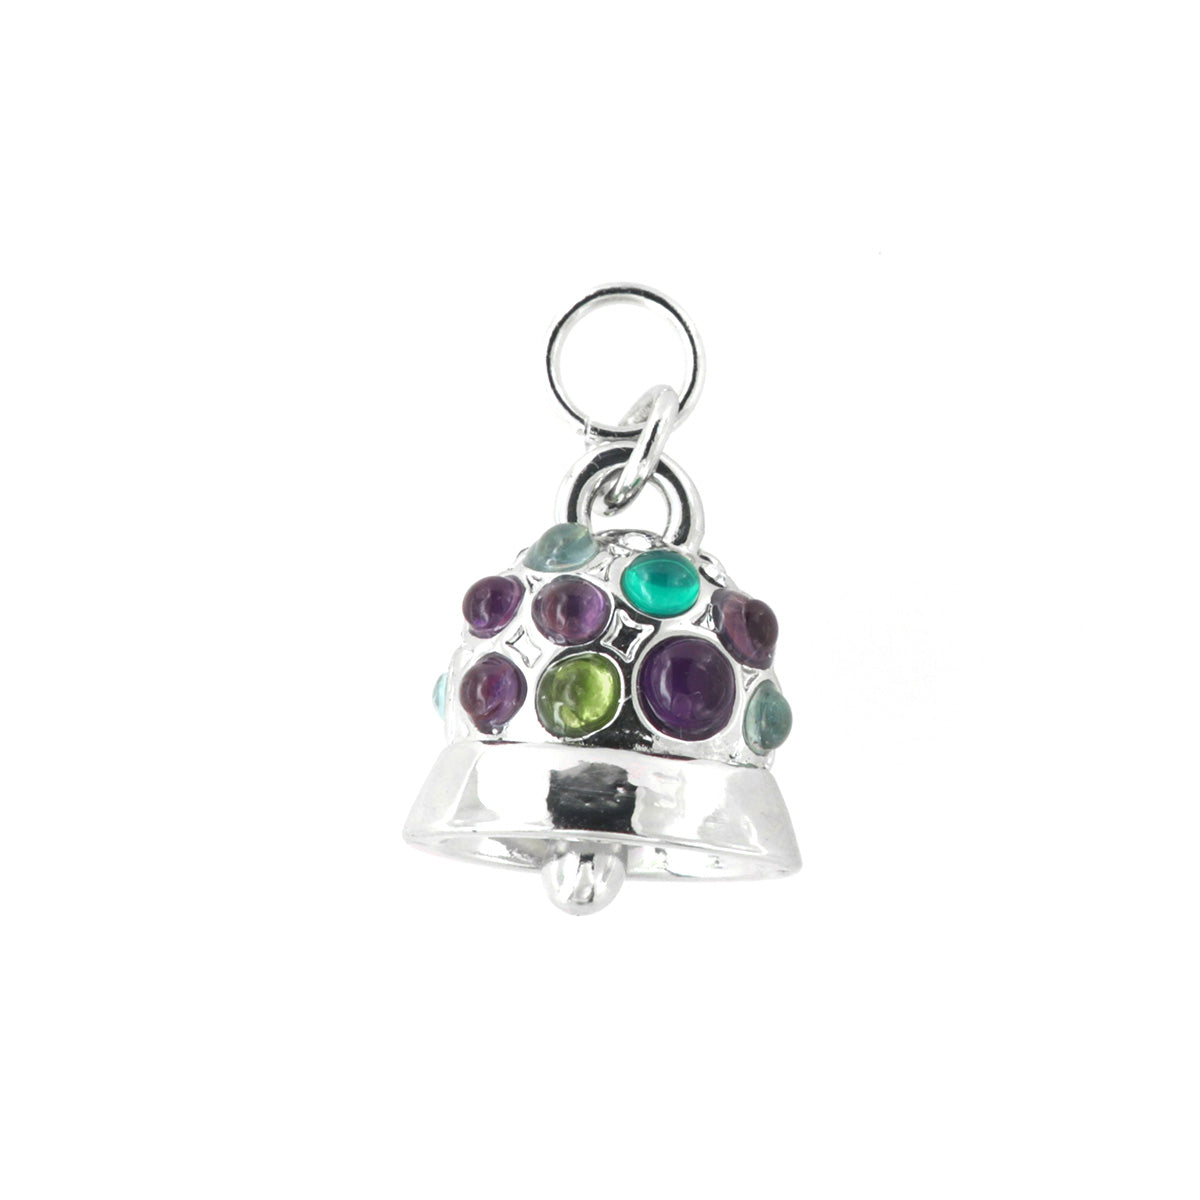 Metal pendant charming bell embellished with multicolored crystals